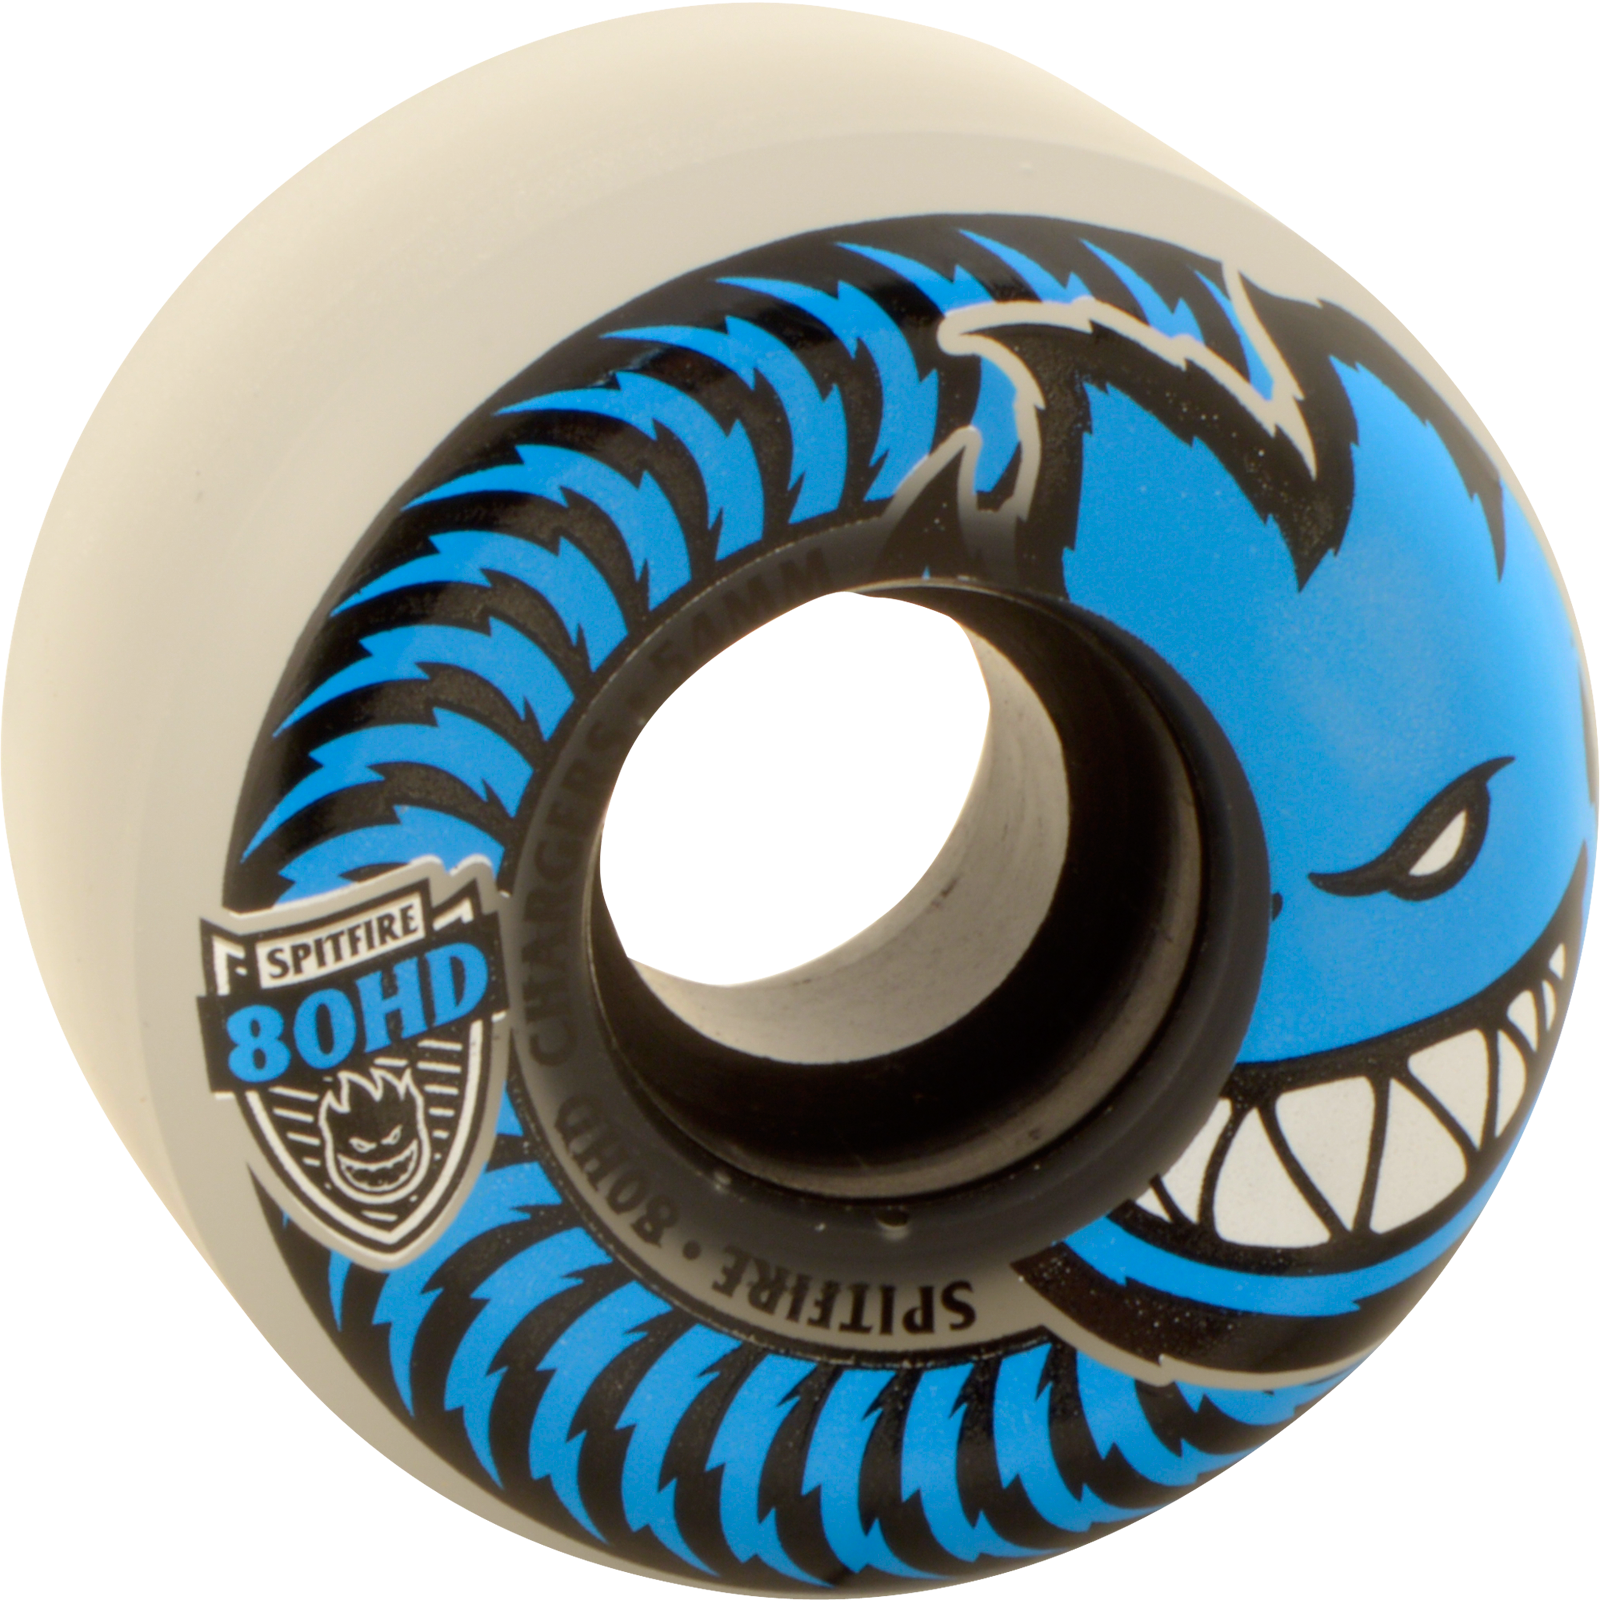 Spitfire 80hd Charger Conical 54mm Clear/Blue Skateboard Wheels (Set of 4) | Universo Extremo Boards Skate & Surf